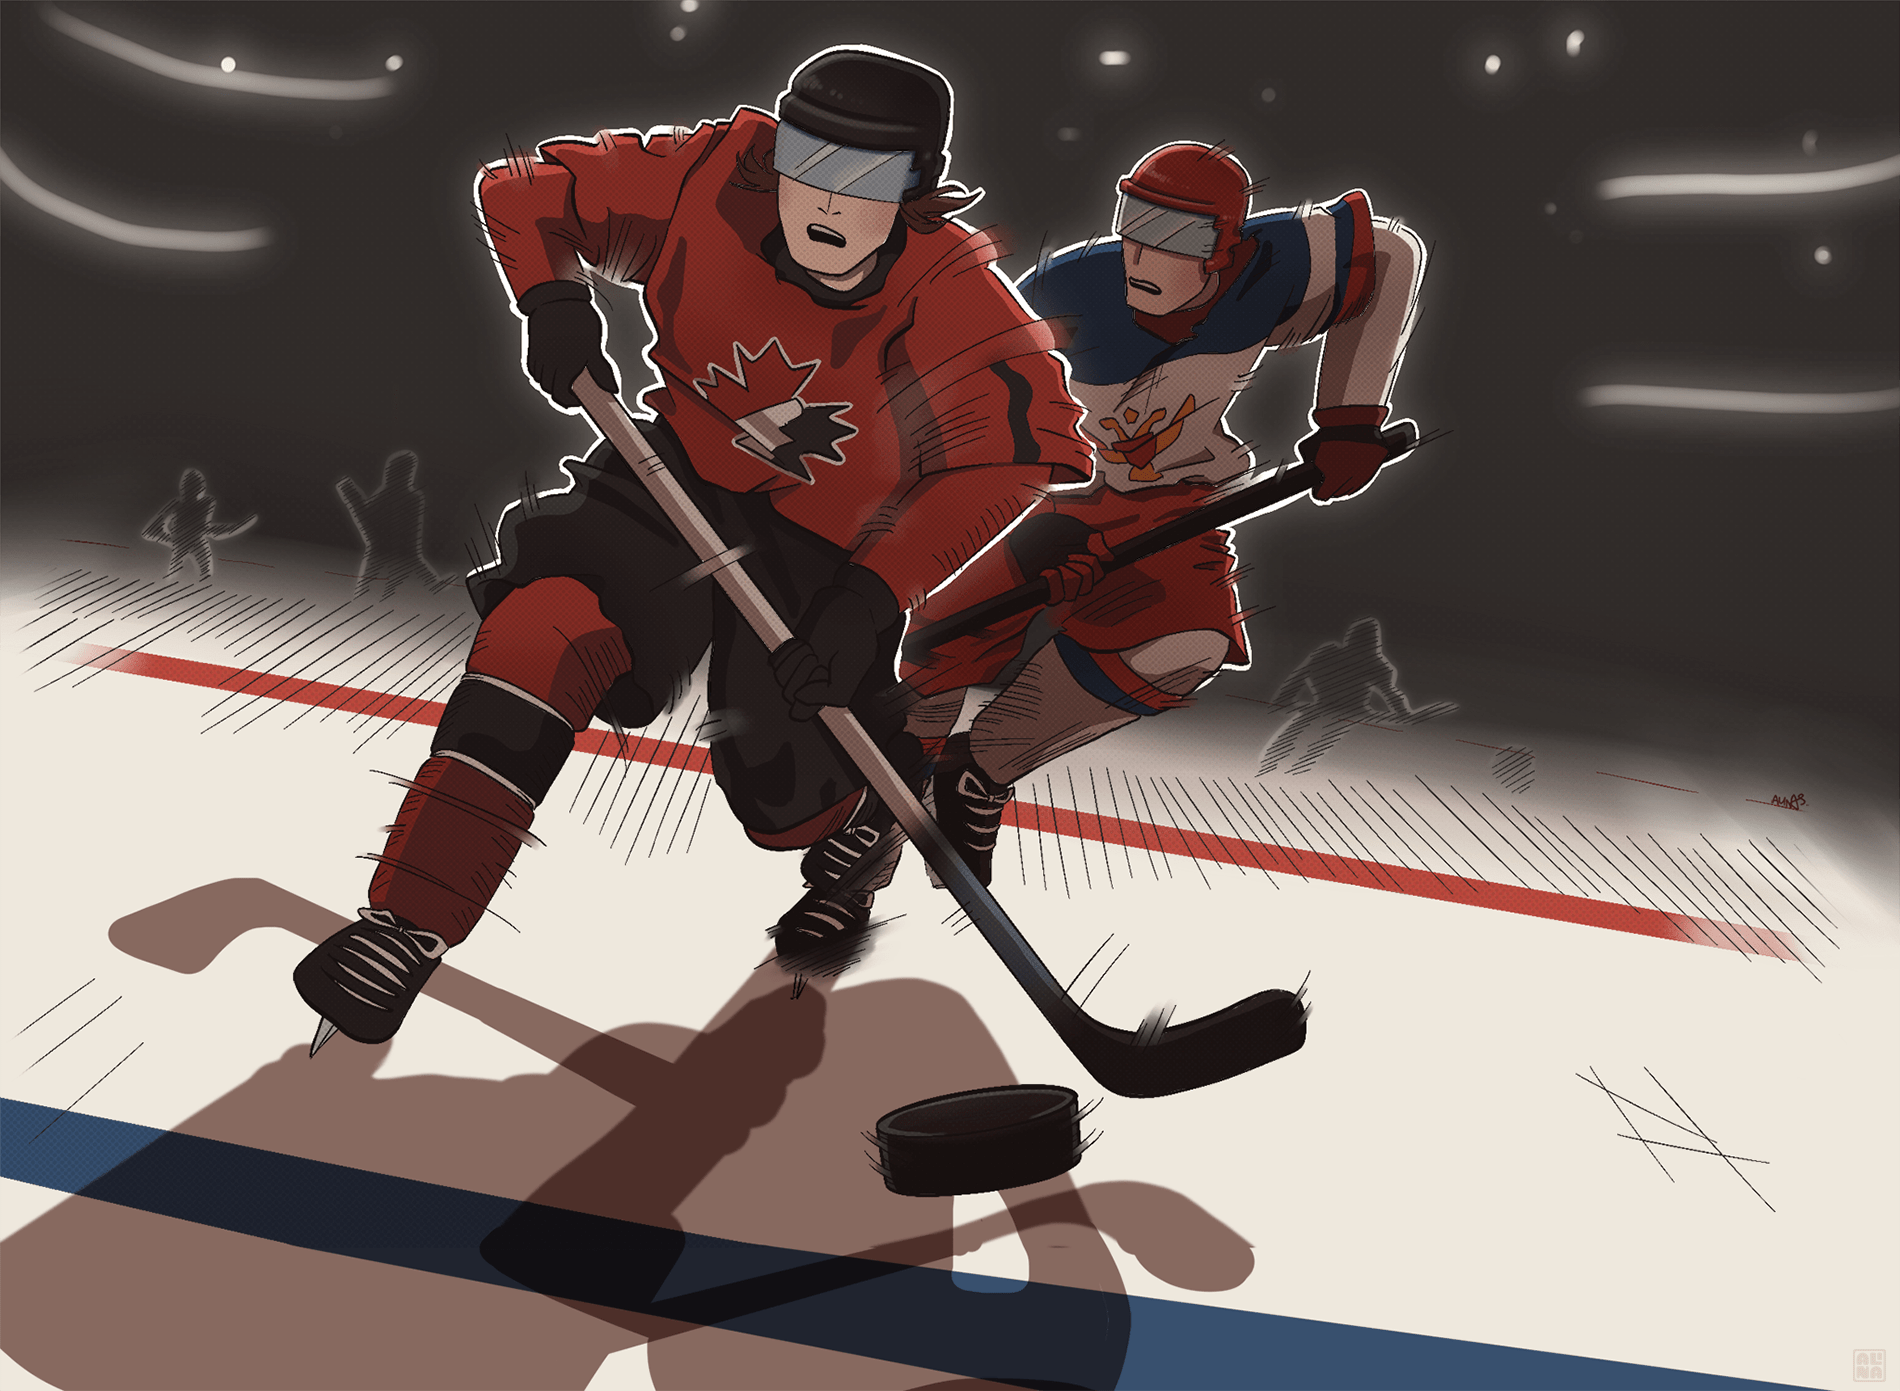 Motion illustration of a Canadian hockey player by passing a Swedish hockey player for control of the puck during the Olympics.